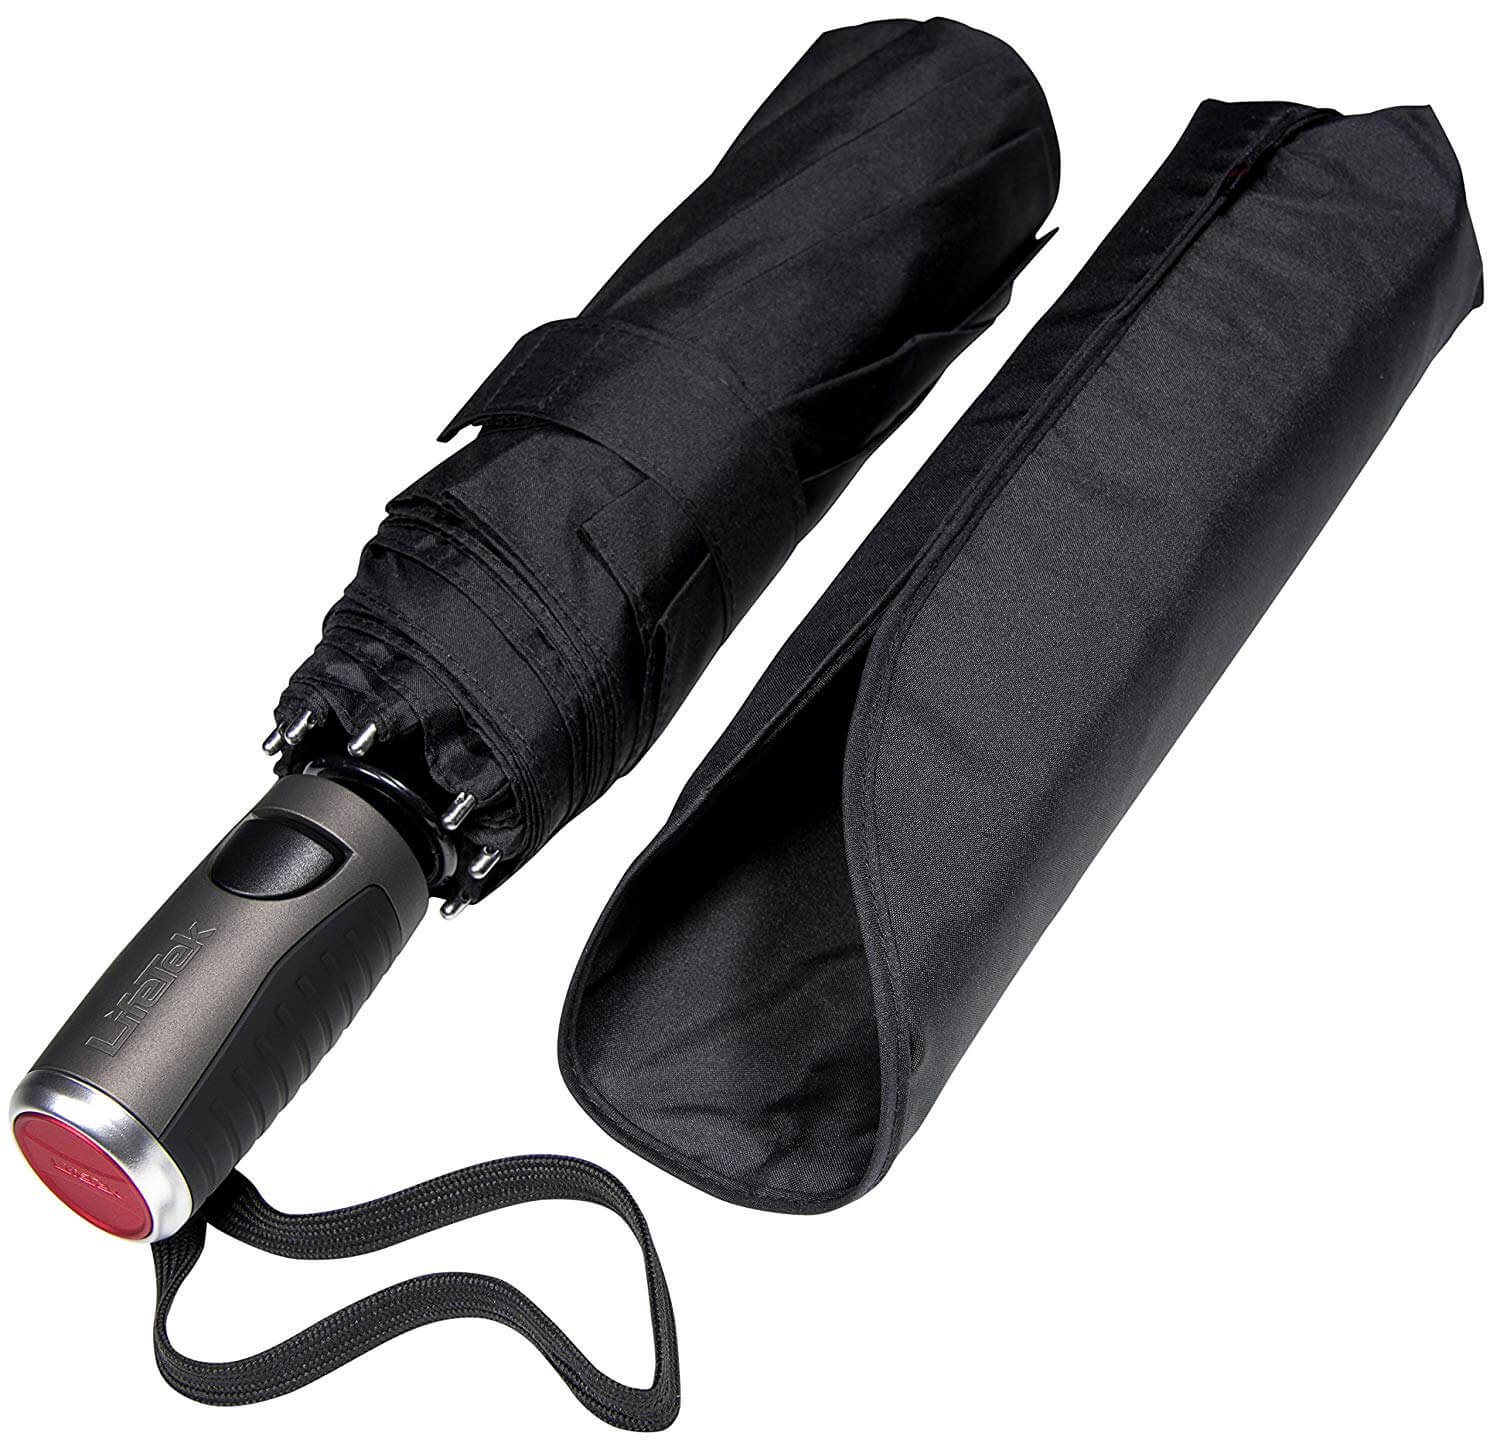 windproof umbrella perfect to bring with you for a trip